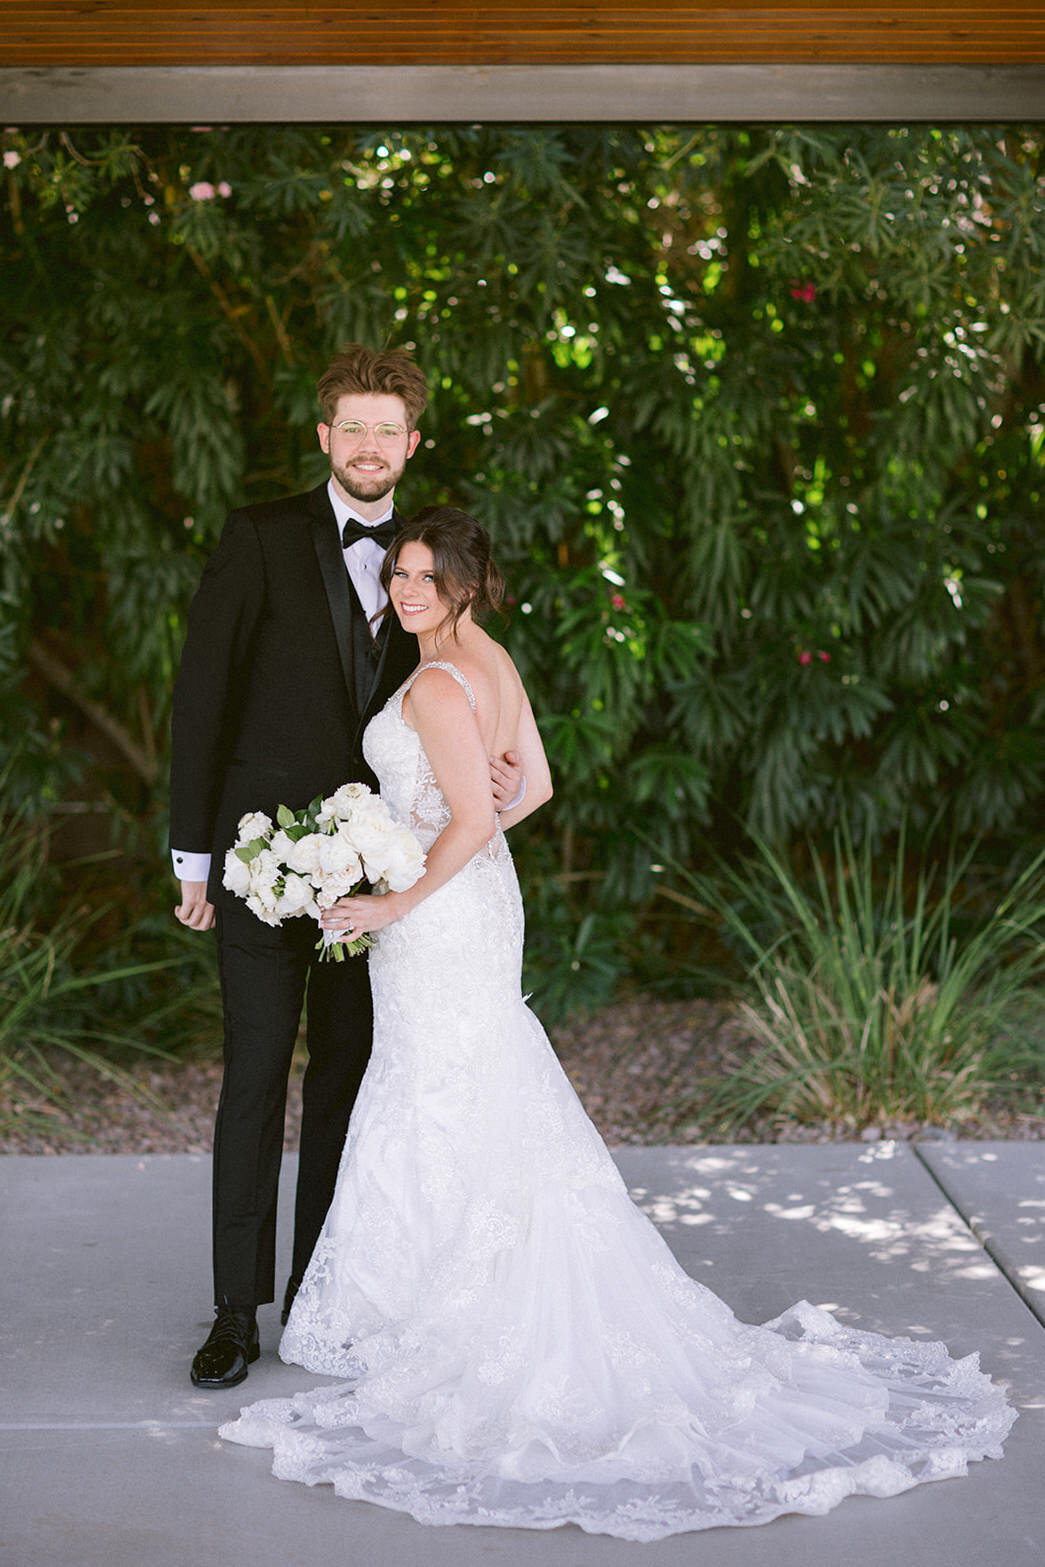 Soft and Romantic Wedding at Lotus House in Las Vegas - 12